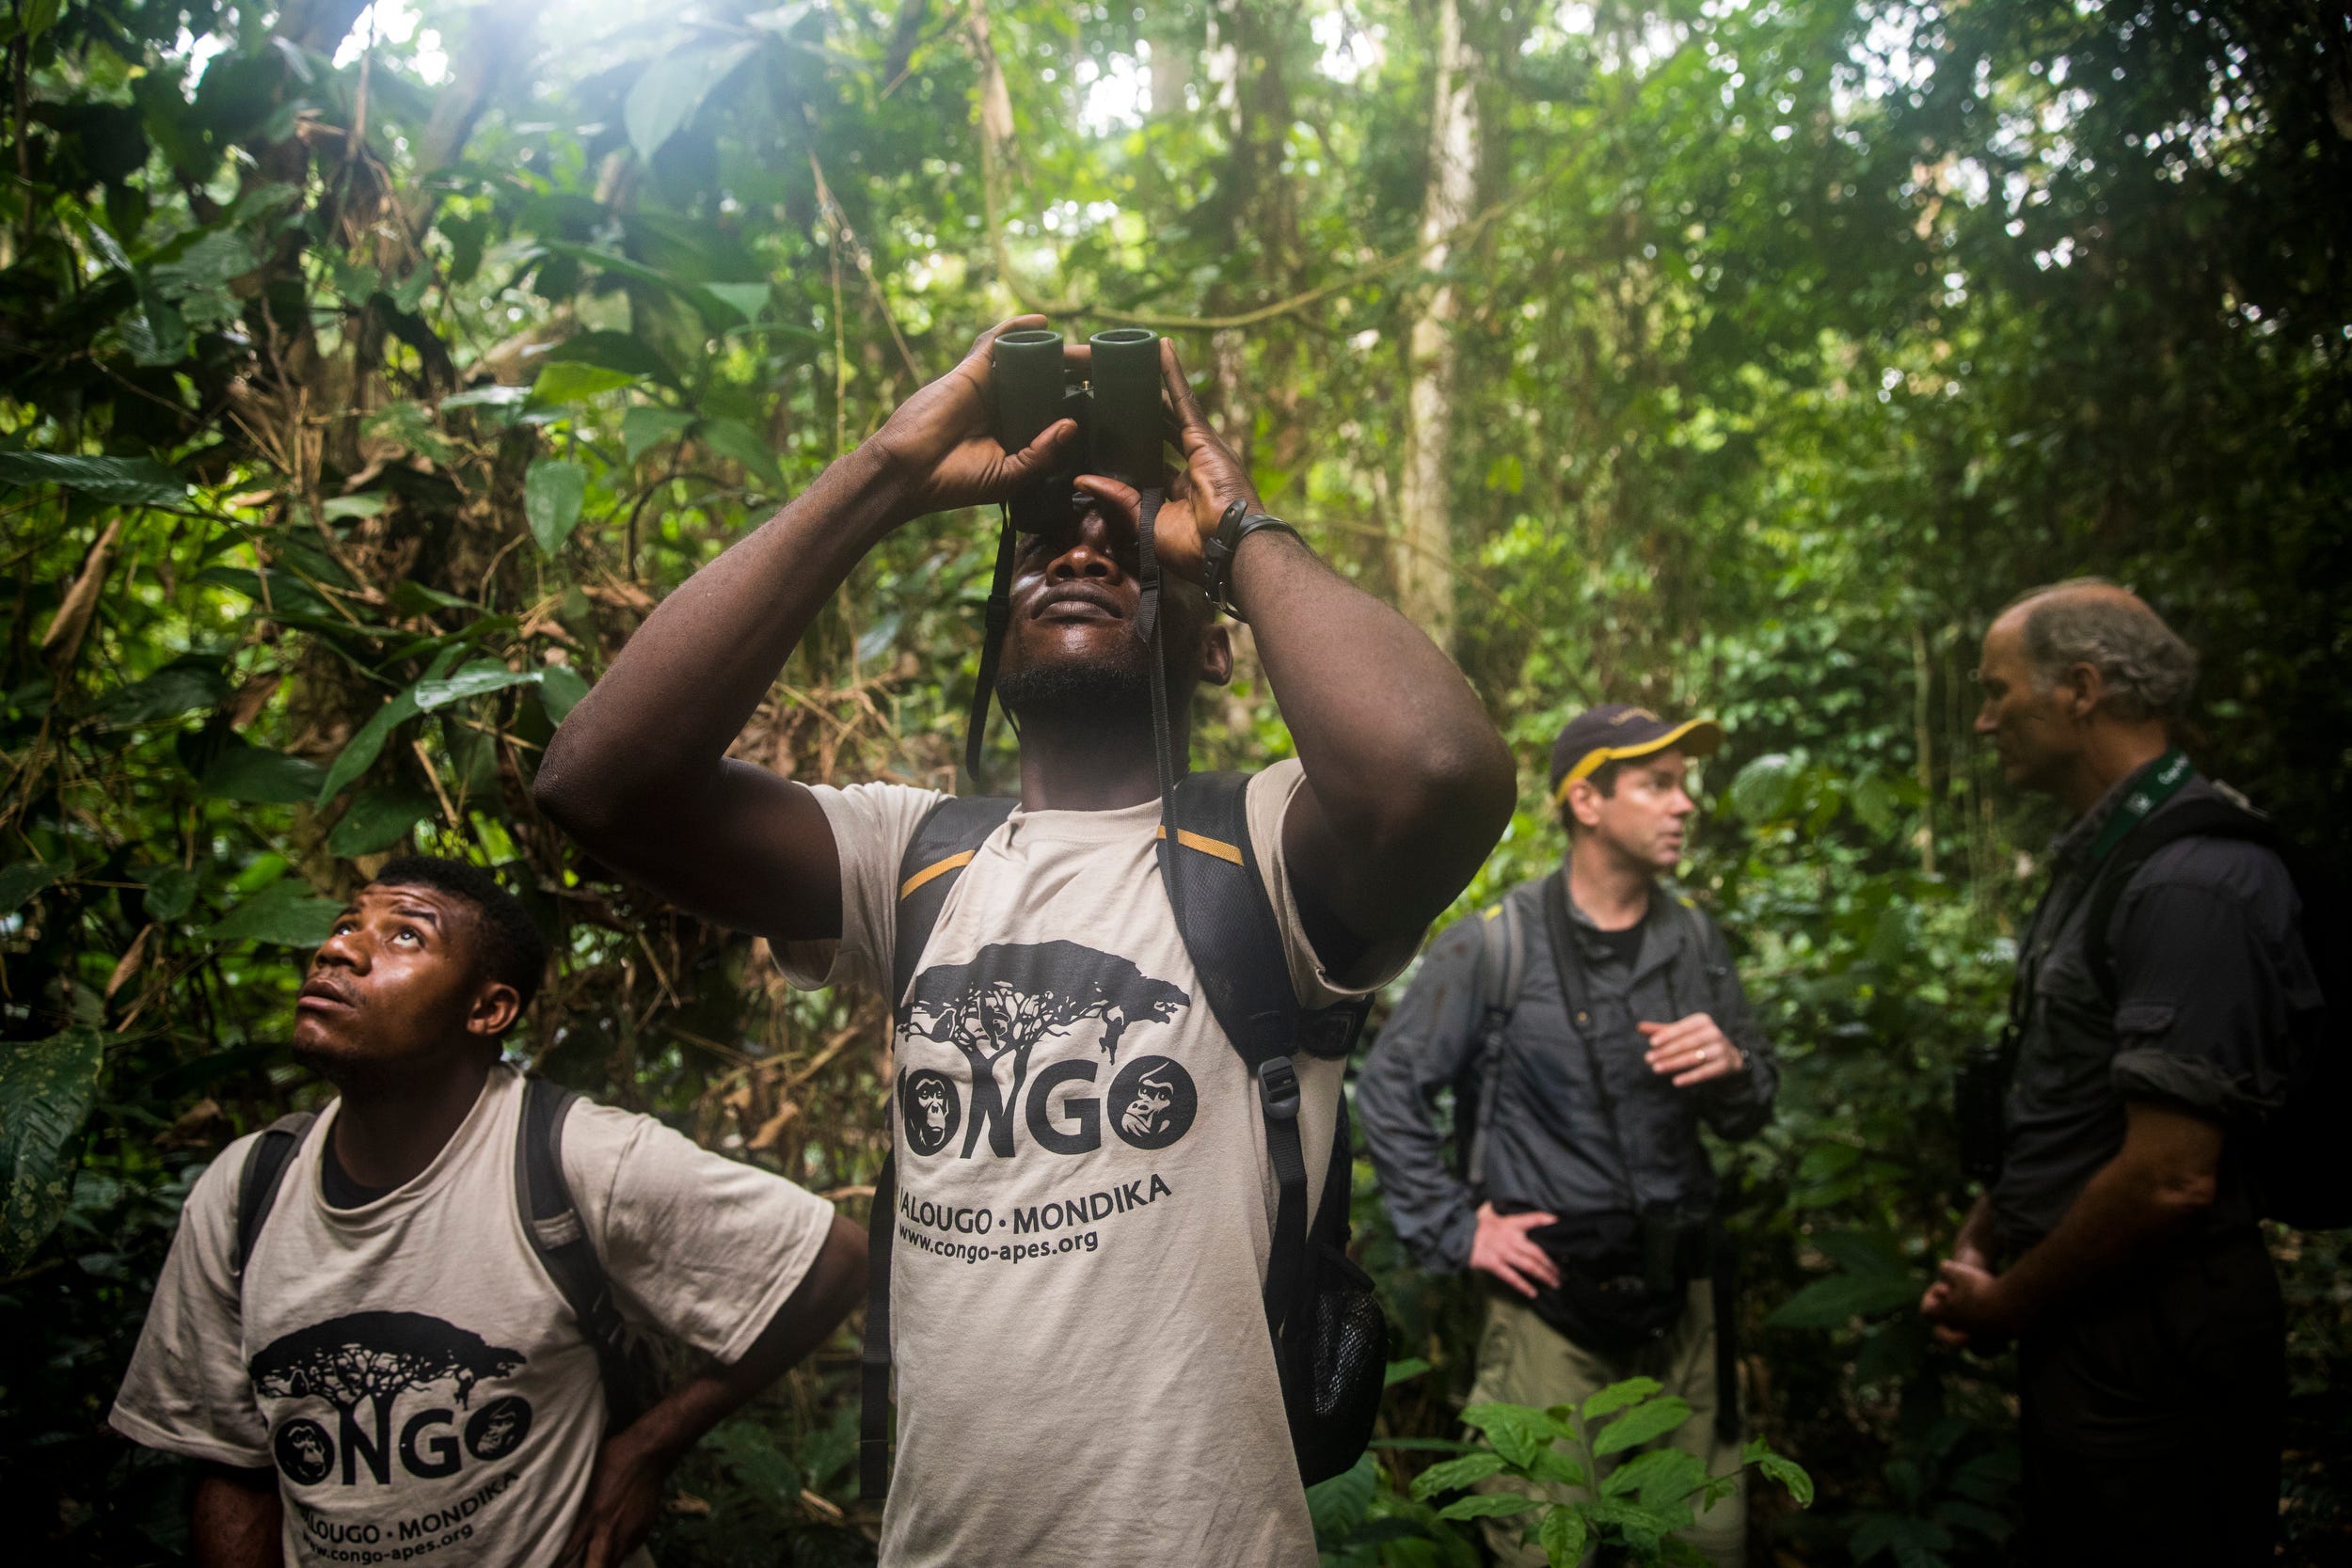 Katy Mbato and Gaiton Mbebuti watch as Loya's family climbs a tree in the Goualougo Triangle. When observing the gorillas, you must keep a distance of at least 23 feet. If you are in that range, you must wear a face mask to avoid the exchange of disease.